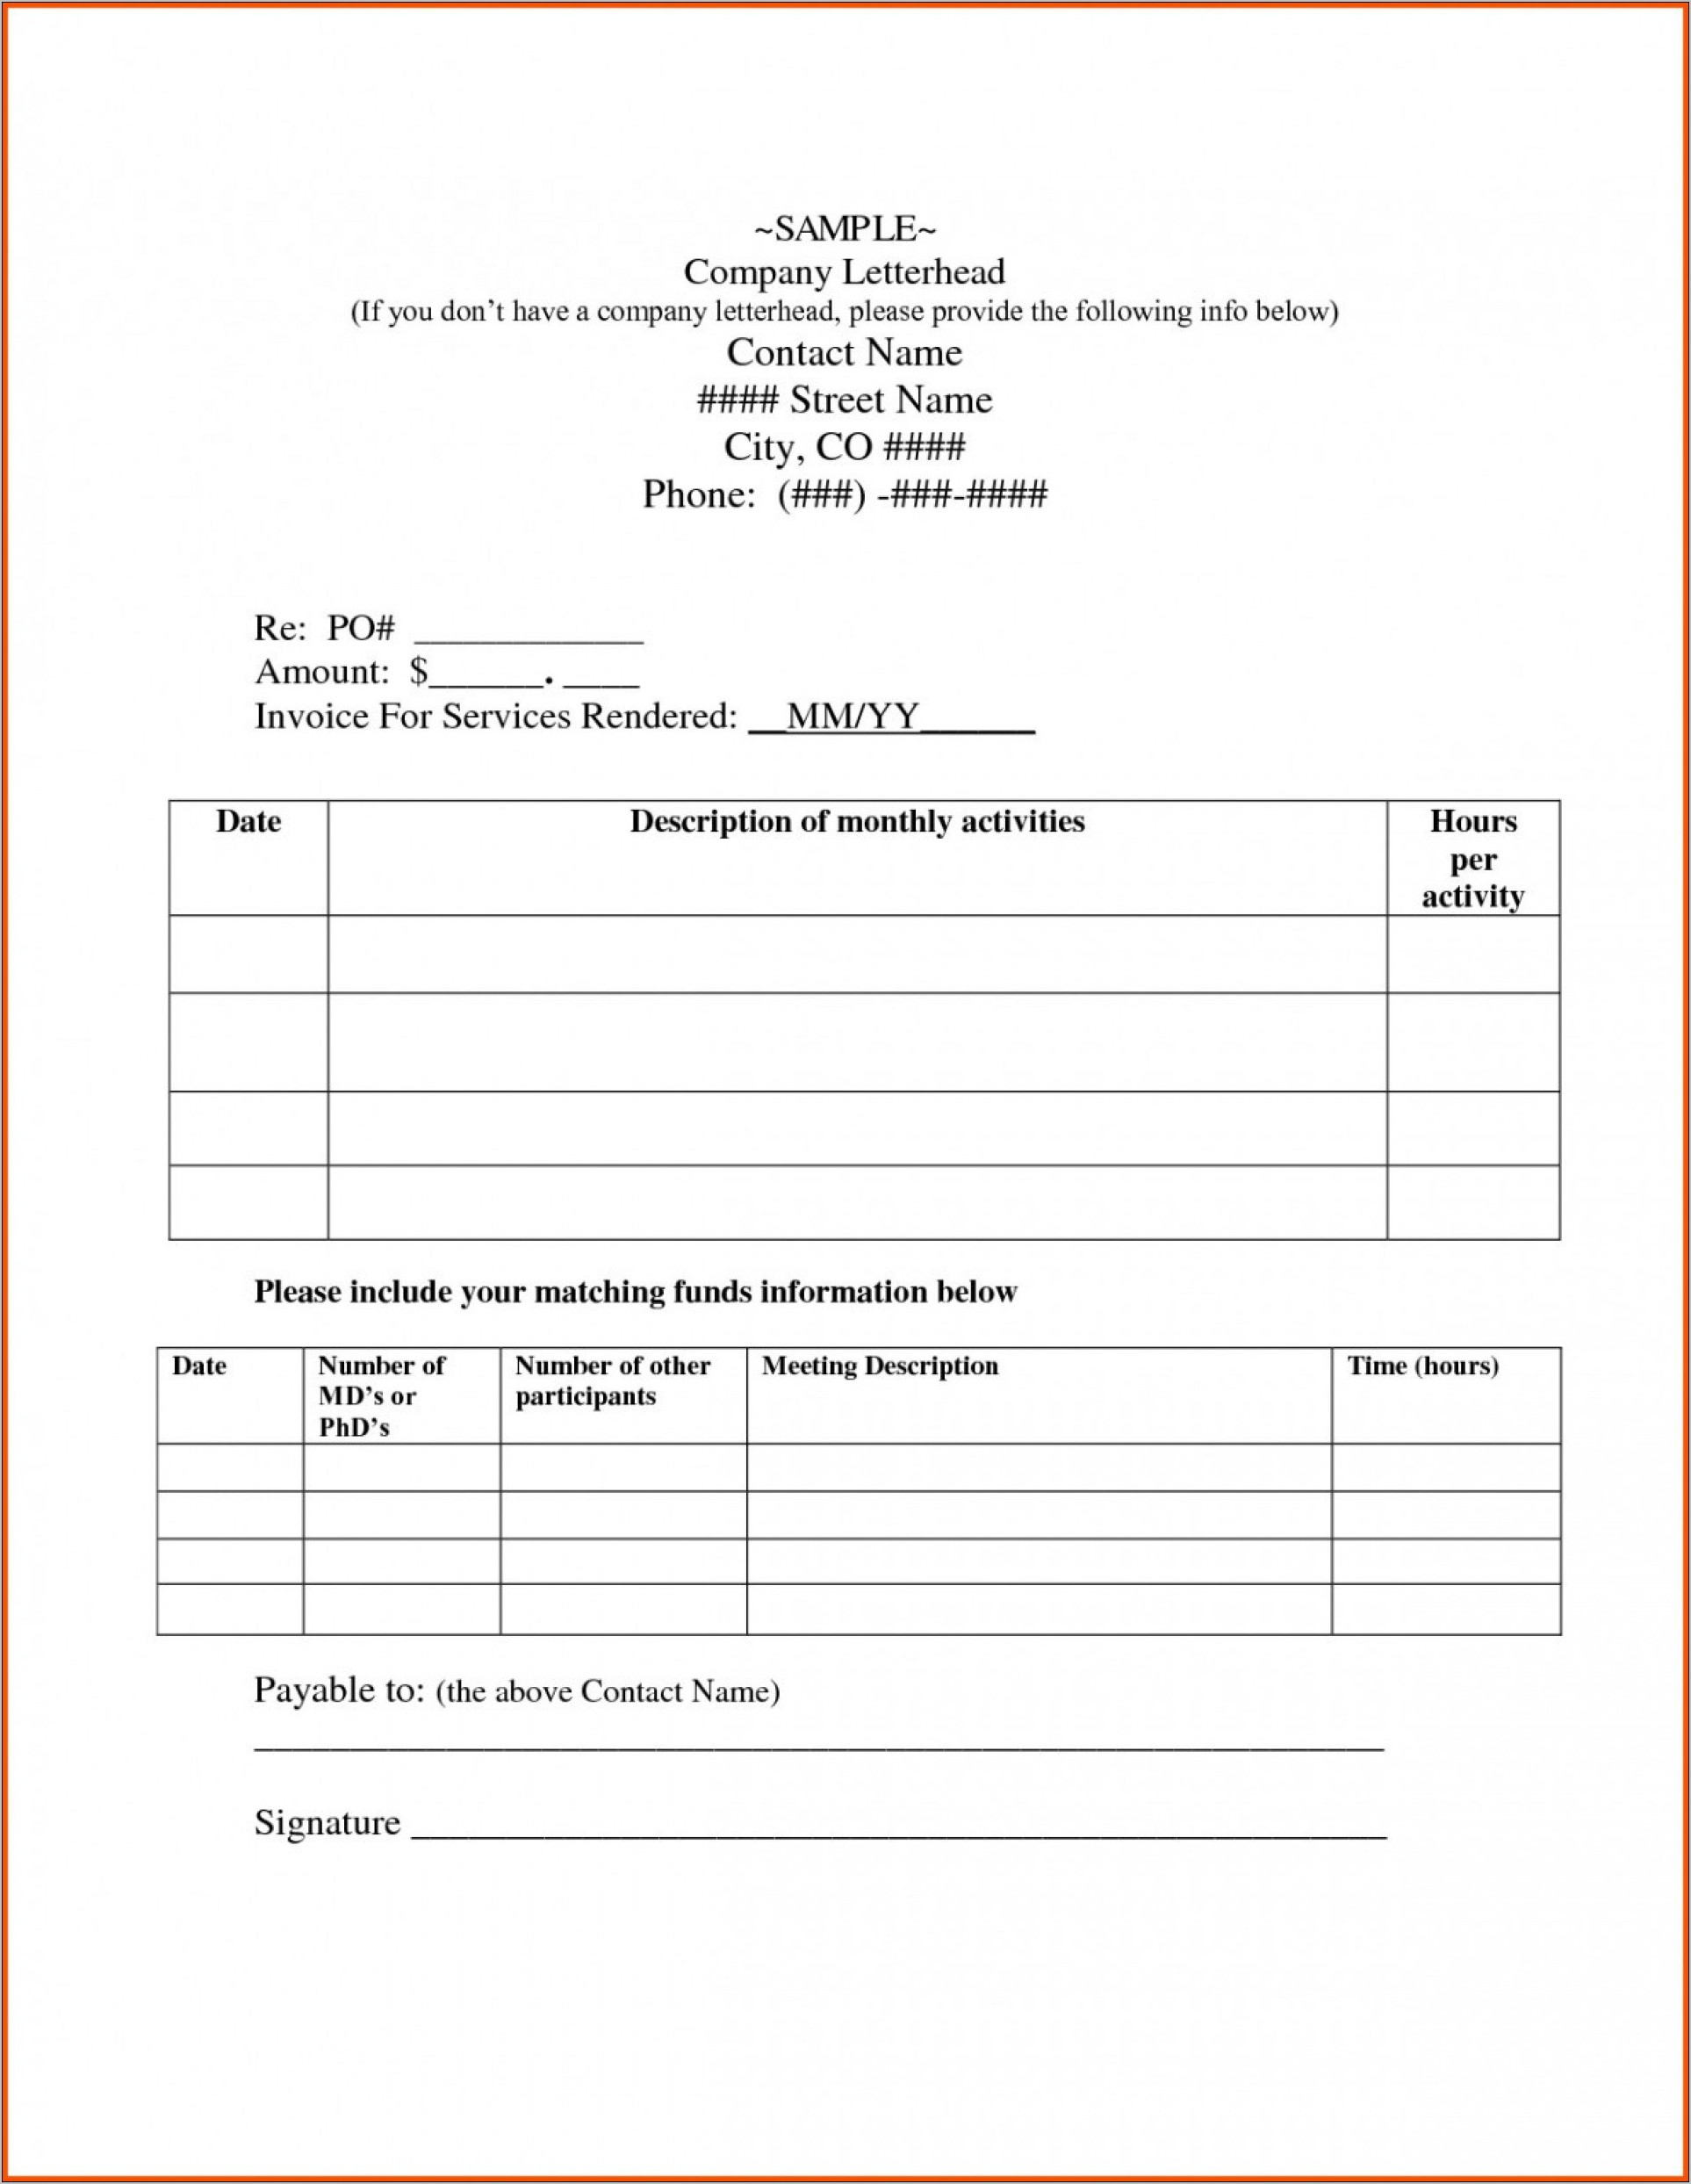 Sample Contractor Invoice Form